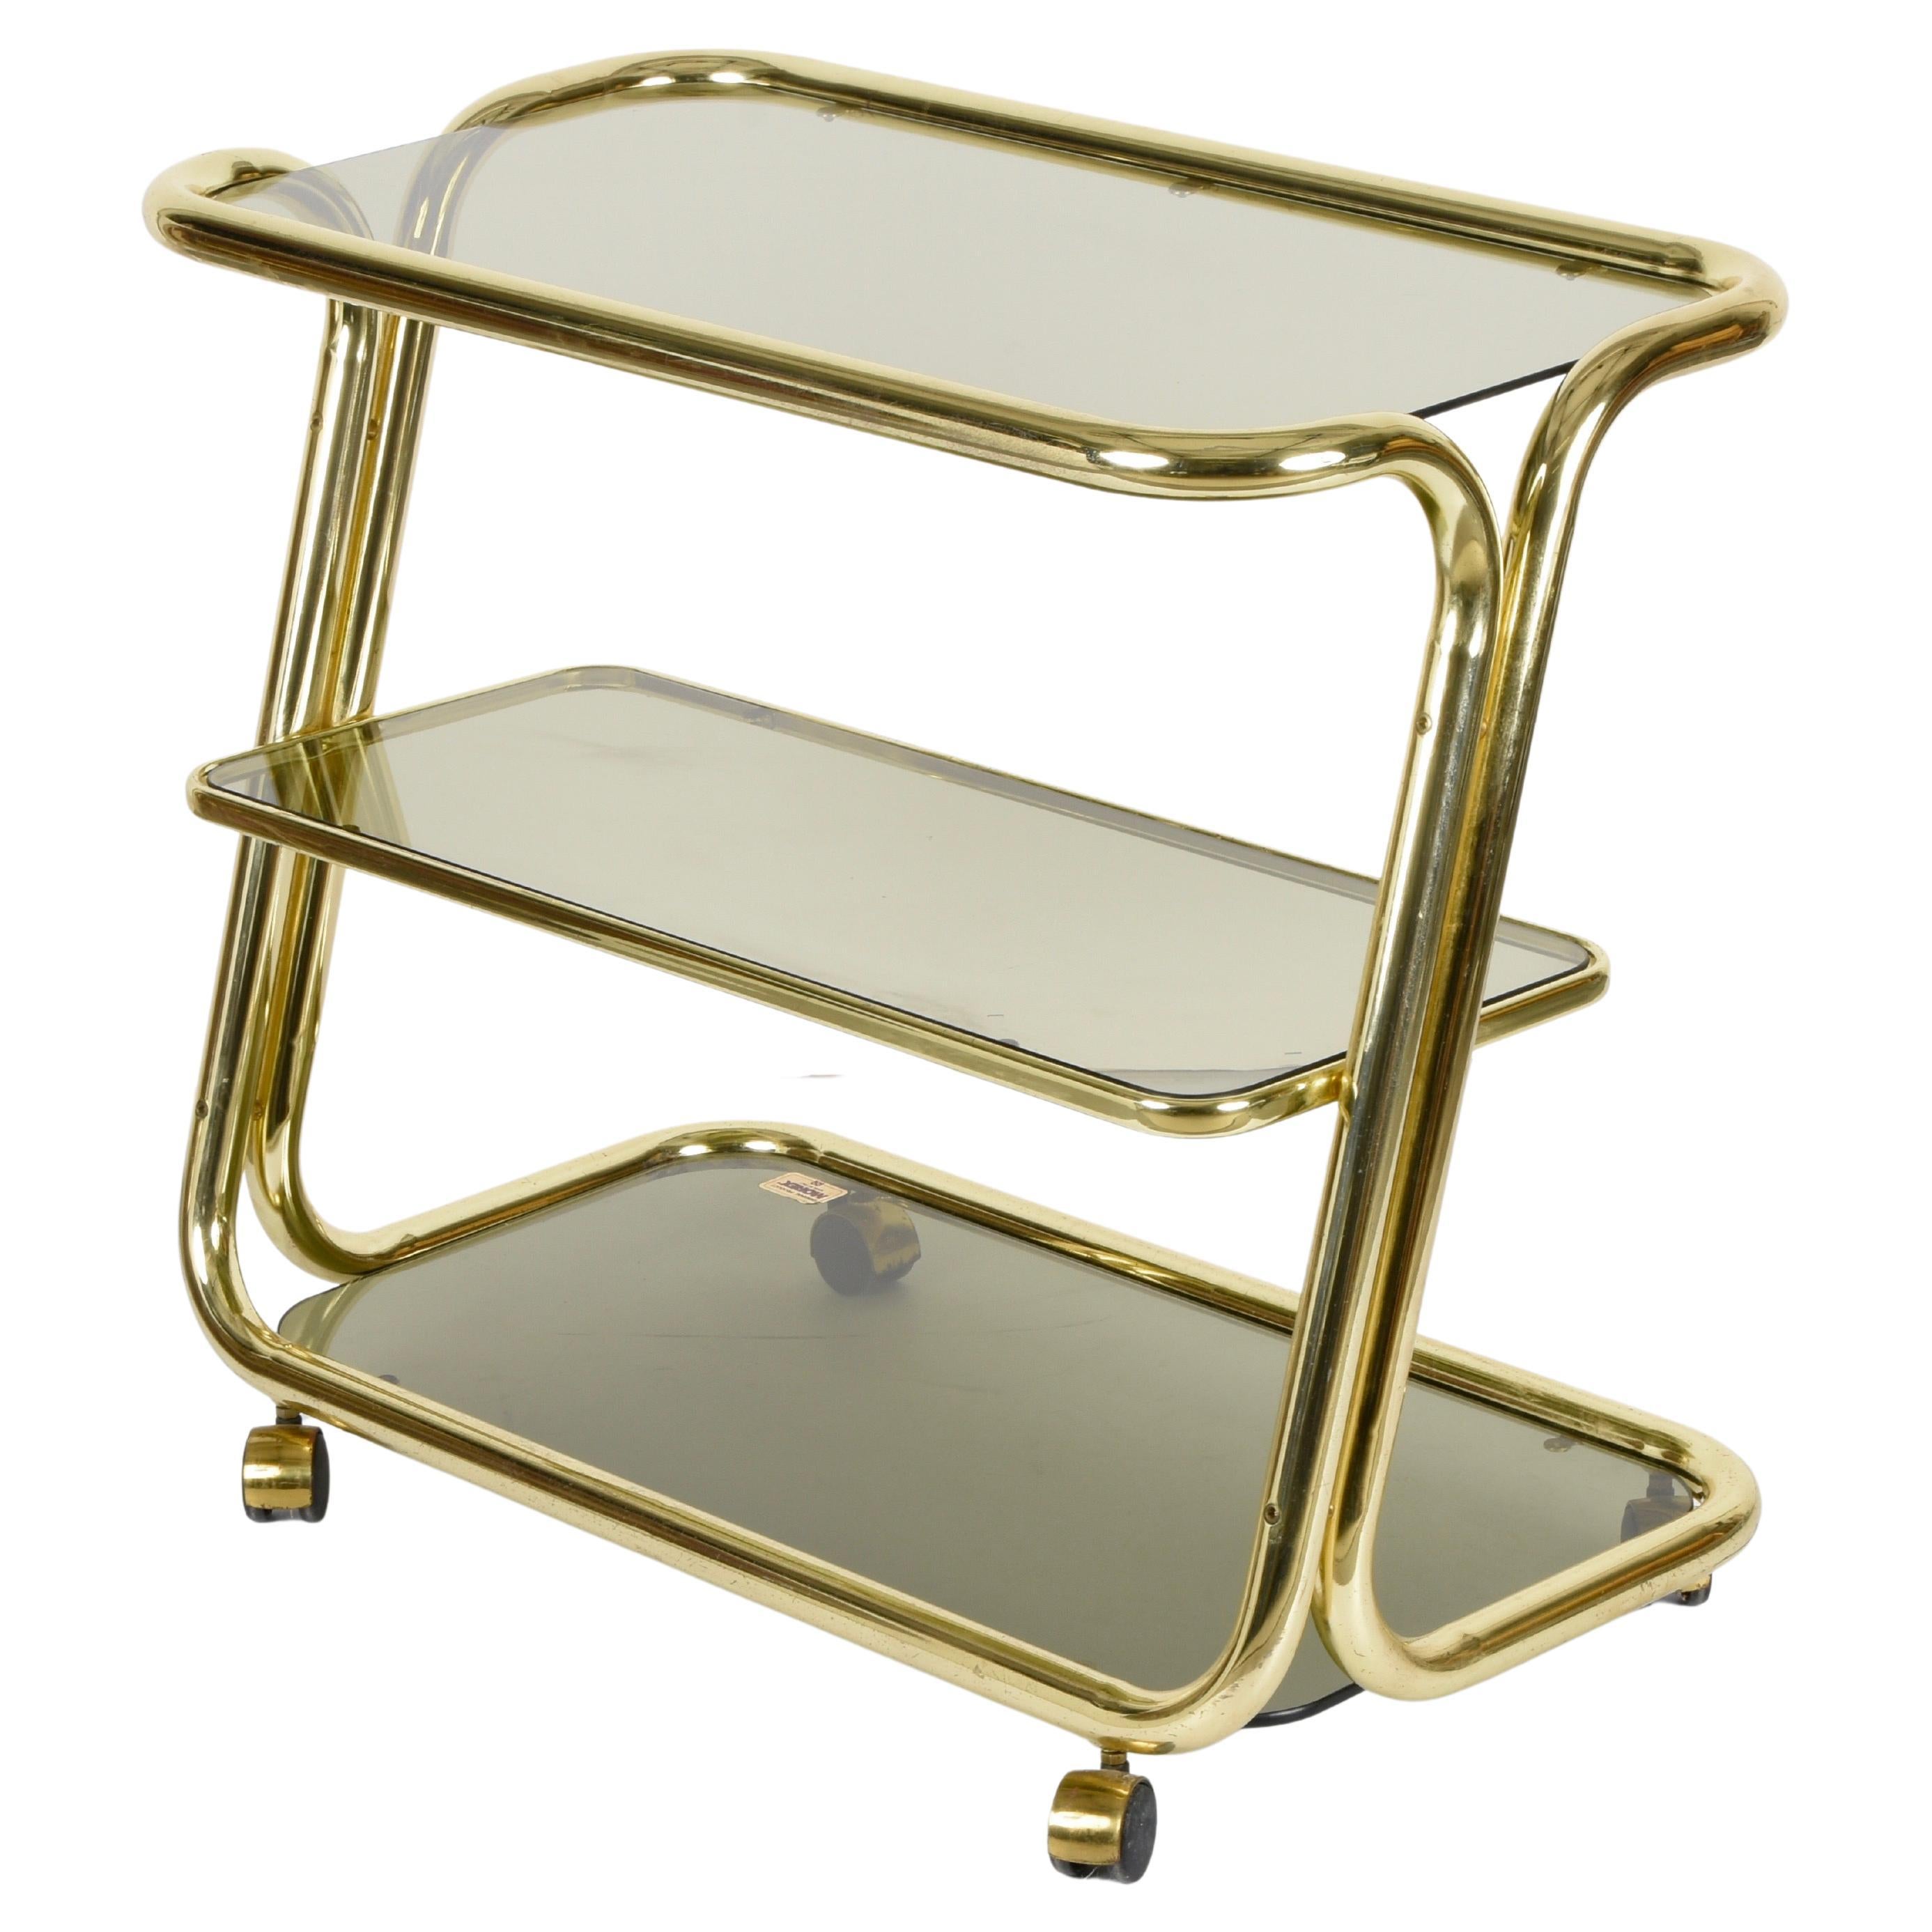 Exceptional mid-century brass and three-levelled smoked glass bar cart. This fantastic service cart was produced by Morex in Italy during the 1970s.

The elegance of this wonderful piece is due to the tubular, space-age and delicate shiny brass